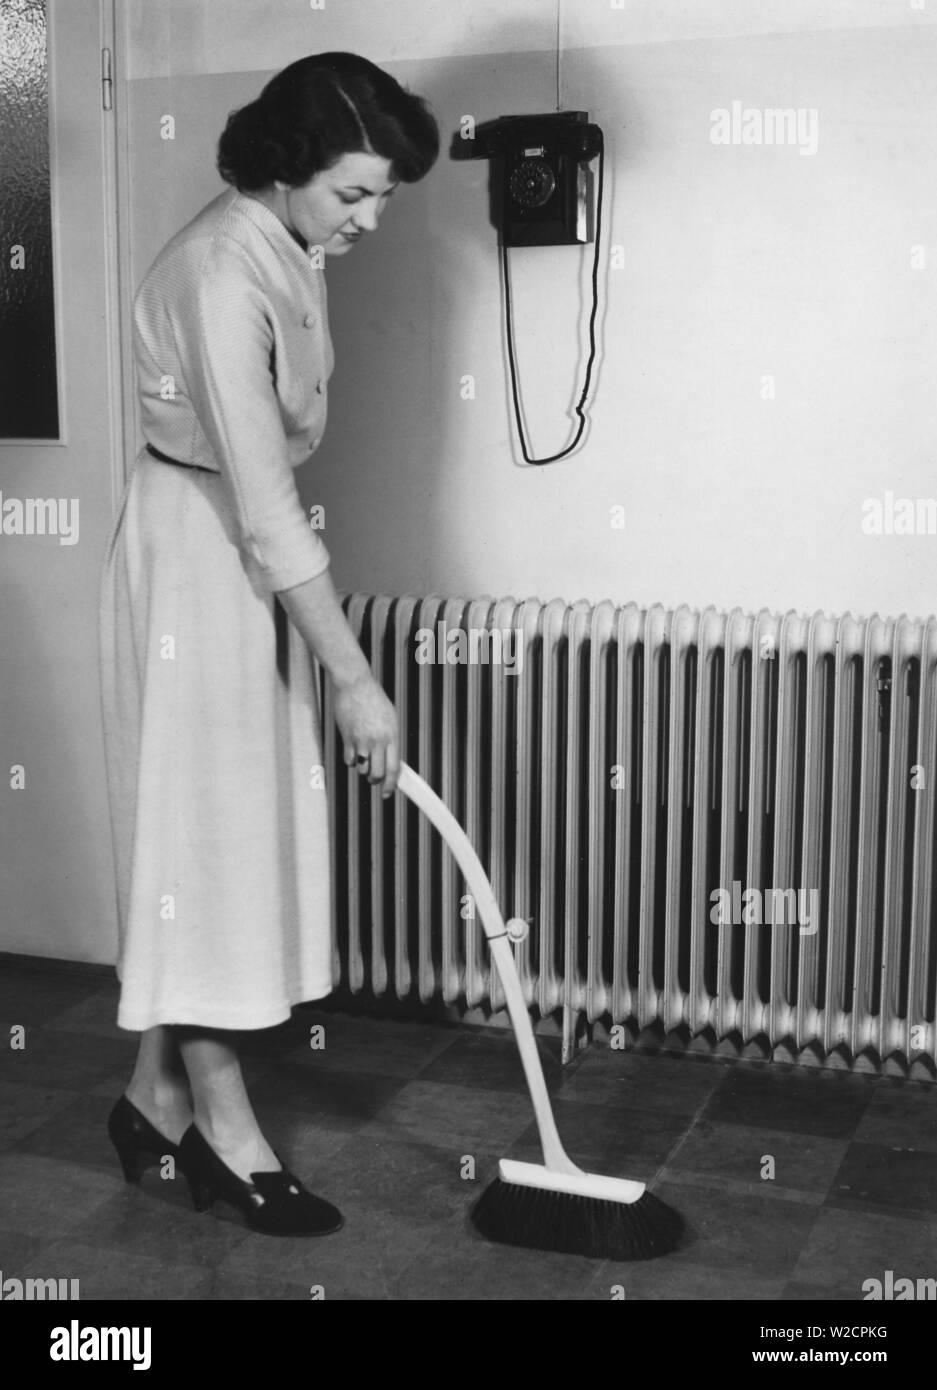 Cleaning day in the 1940s. A young woman is cleaning her apartment and is using a bush with an telescoping handle. A new invention to stand up straight when dusting and avoid back pains. Sweden 1949 Stock Photo